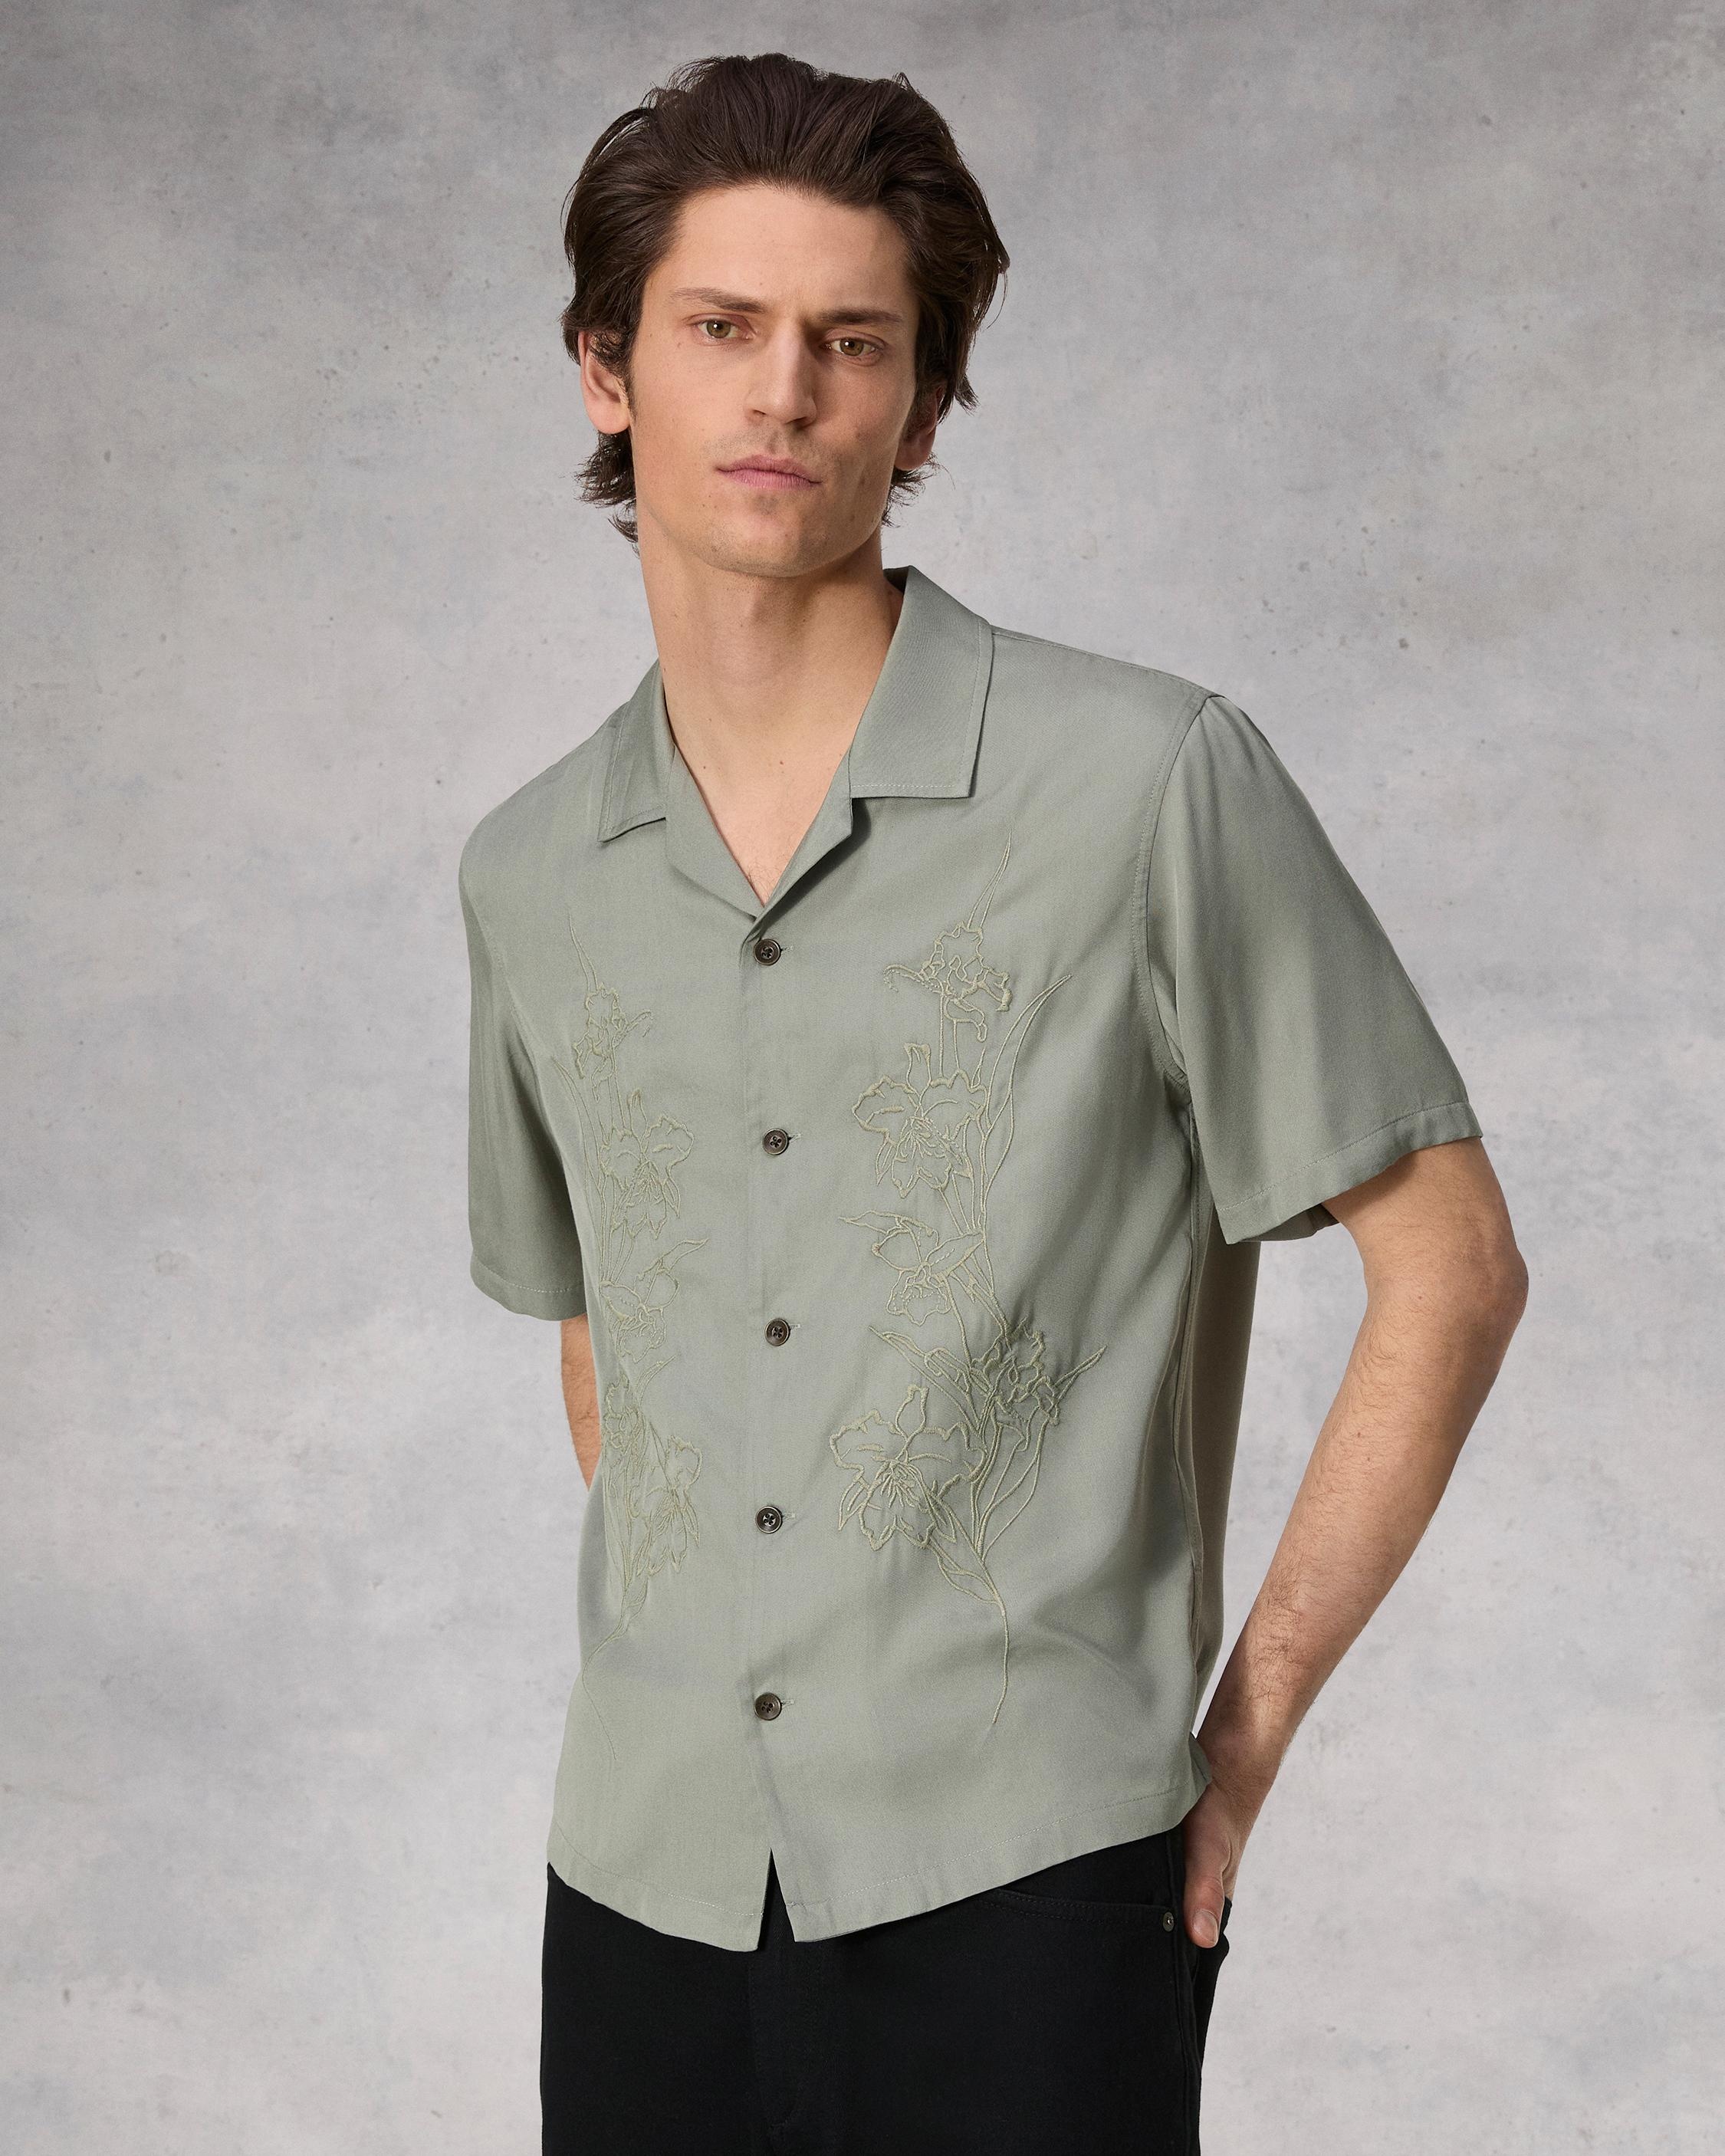 Avery Resort Embroidered Shirt
Relaxed Fit Button Down - 2